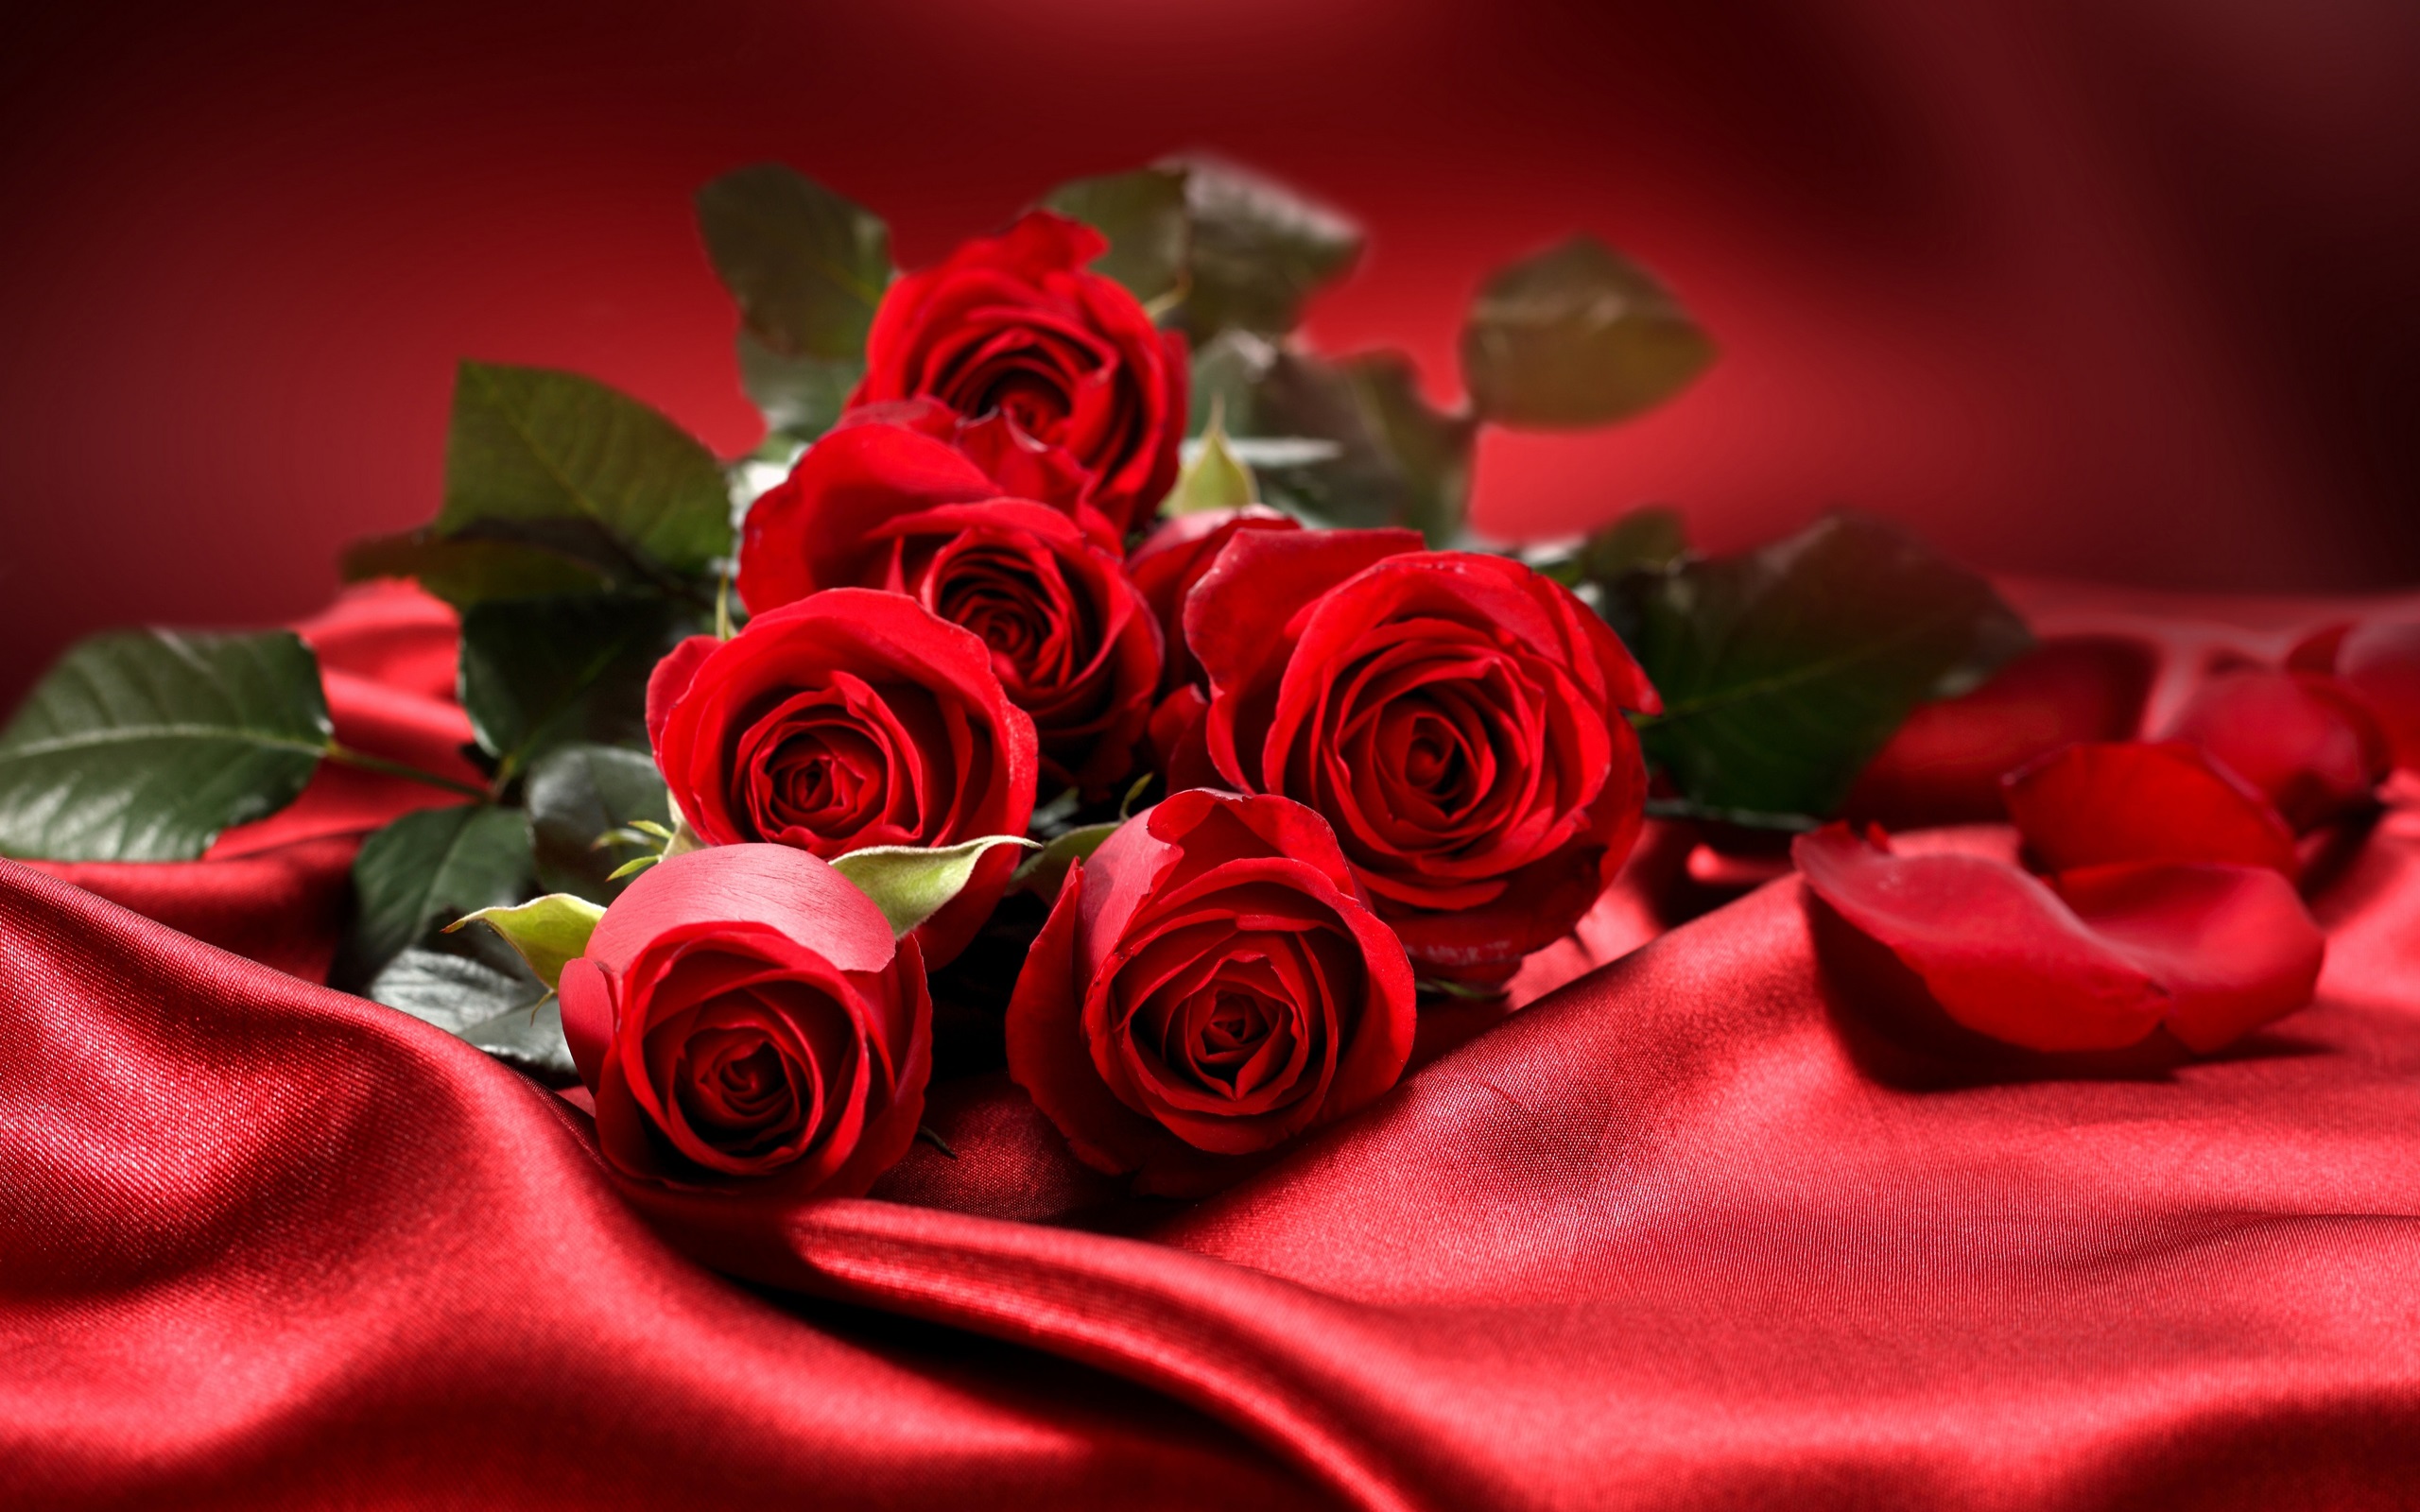 Bouquet Flowers Red Roses Love Valentine S Day 2560x1600 : Wallpapers13.com